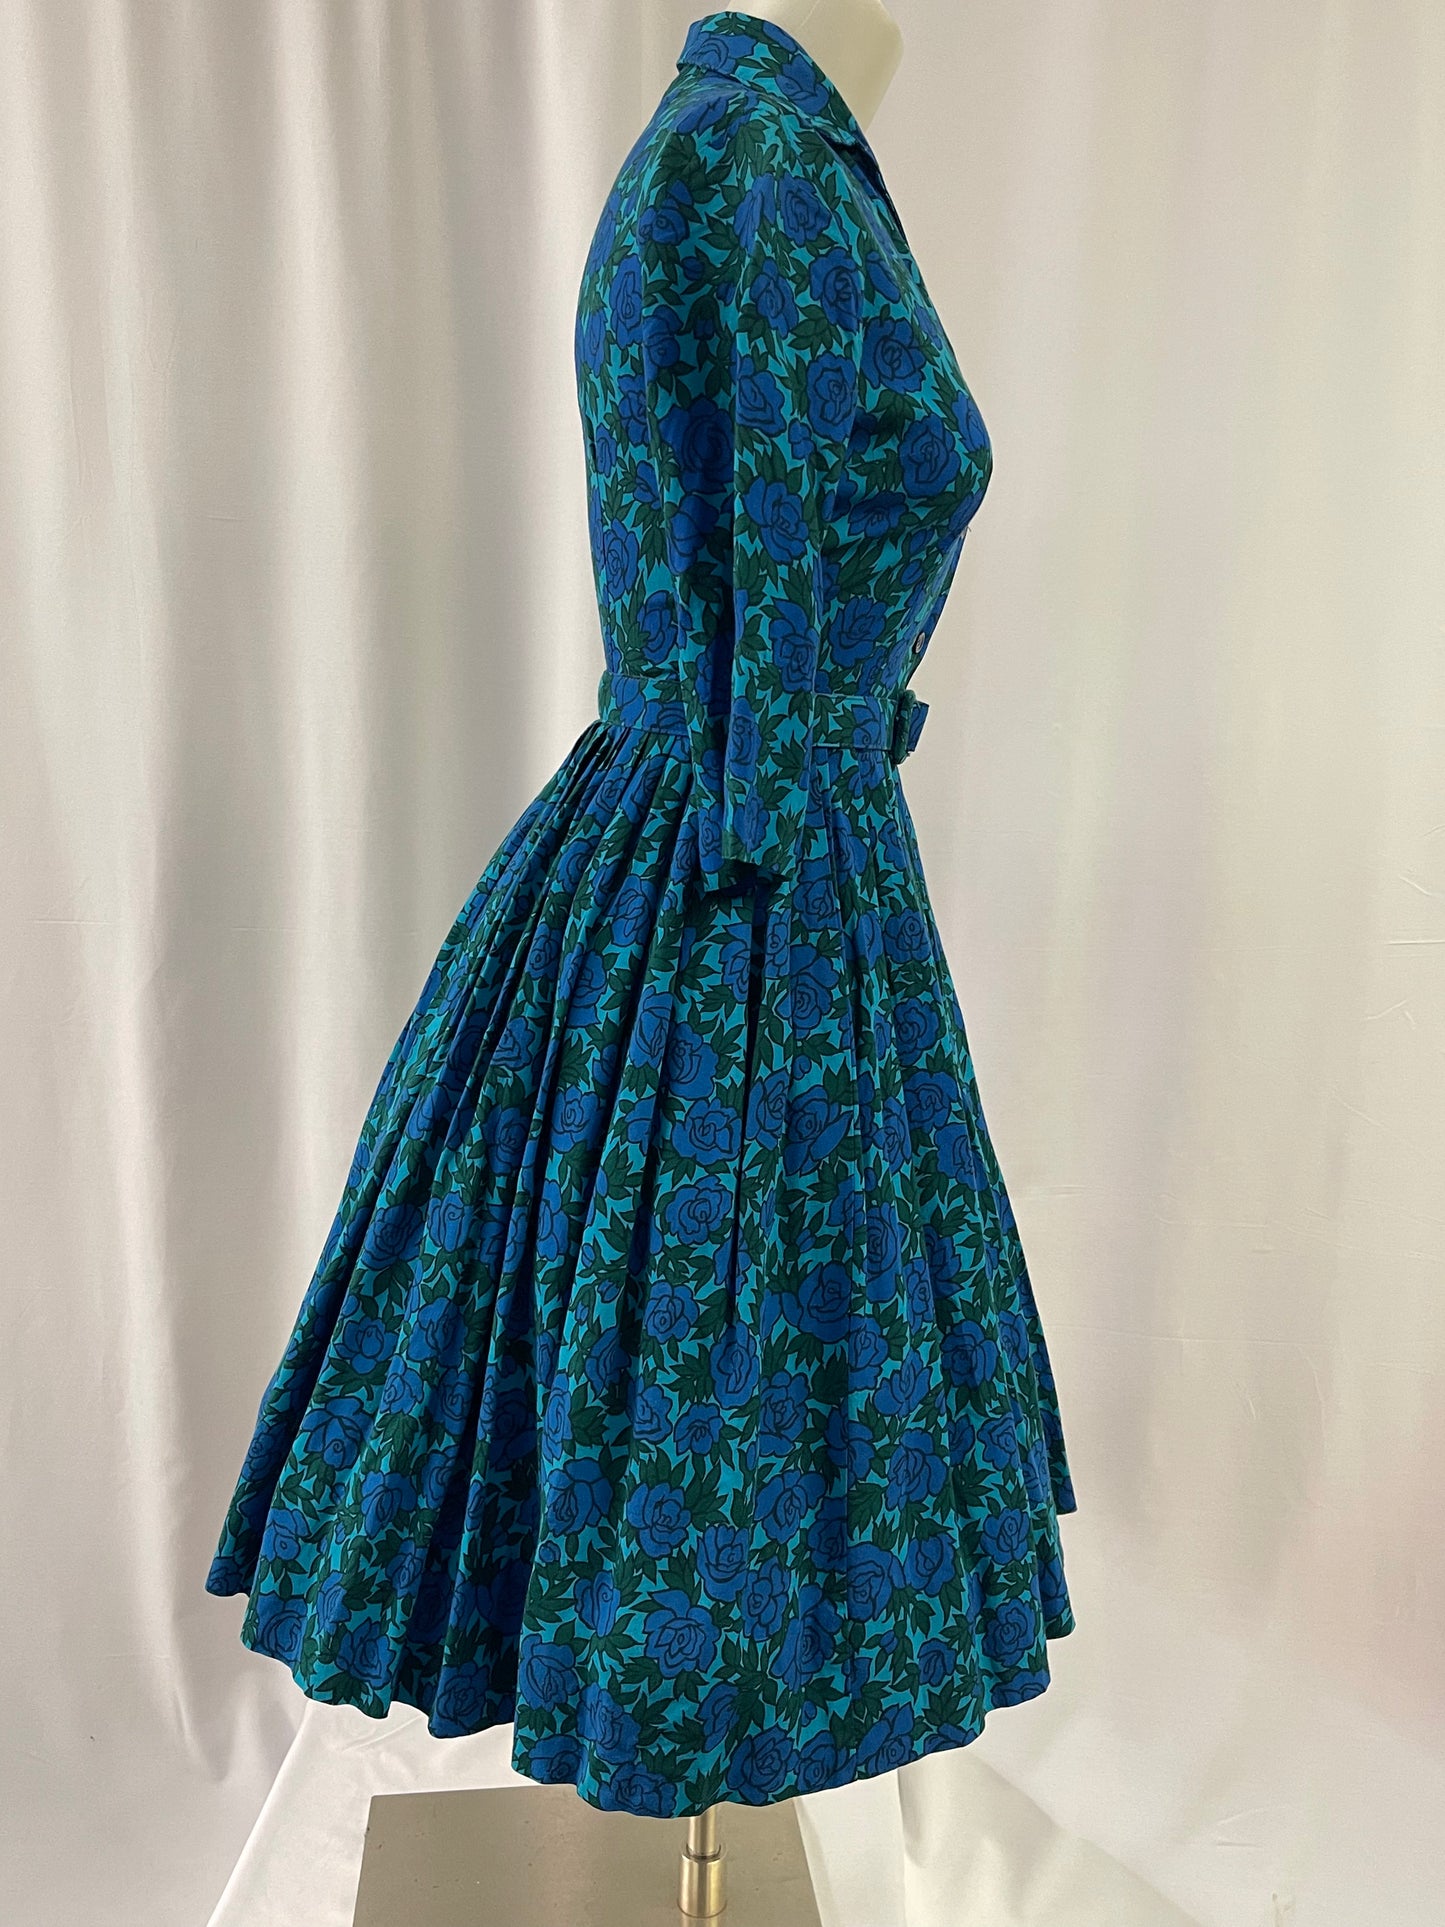 50s Blue and Green Floral Print Dress